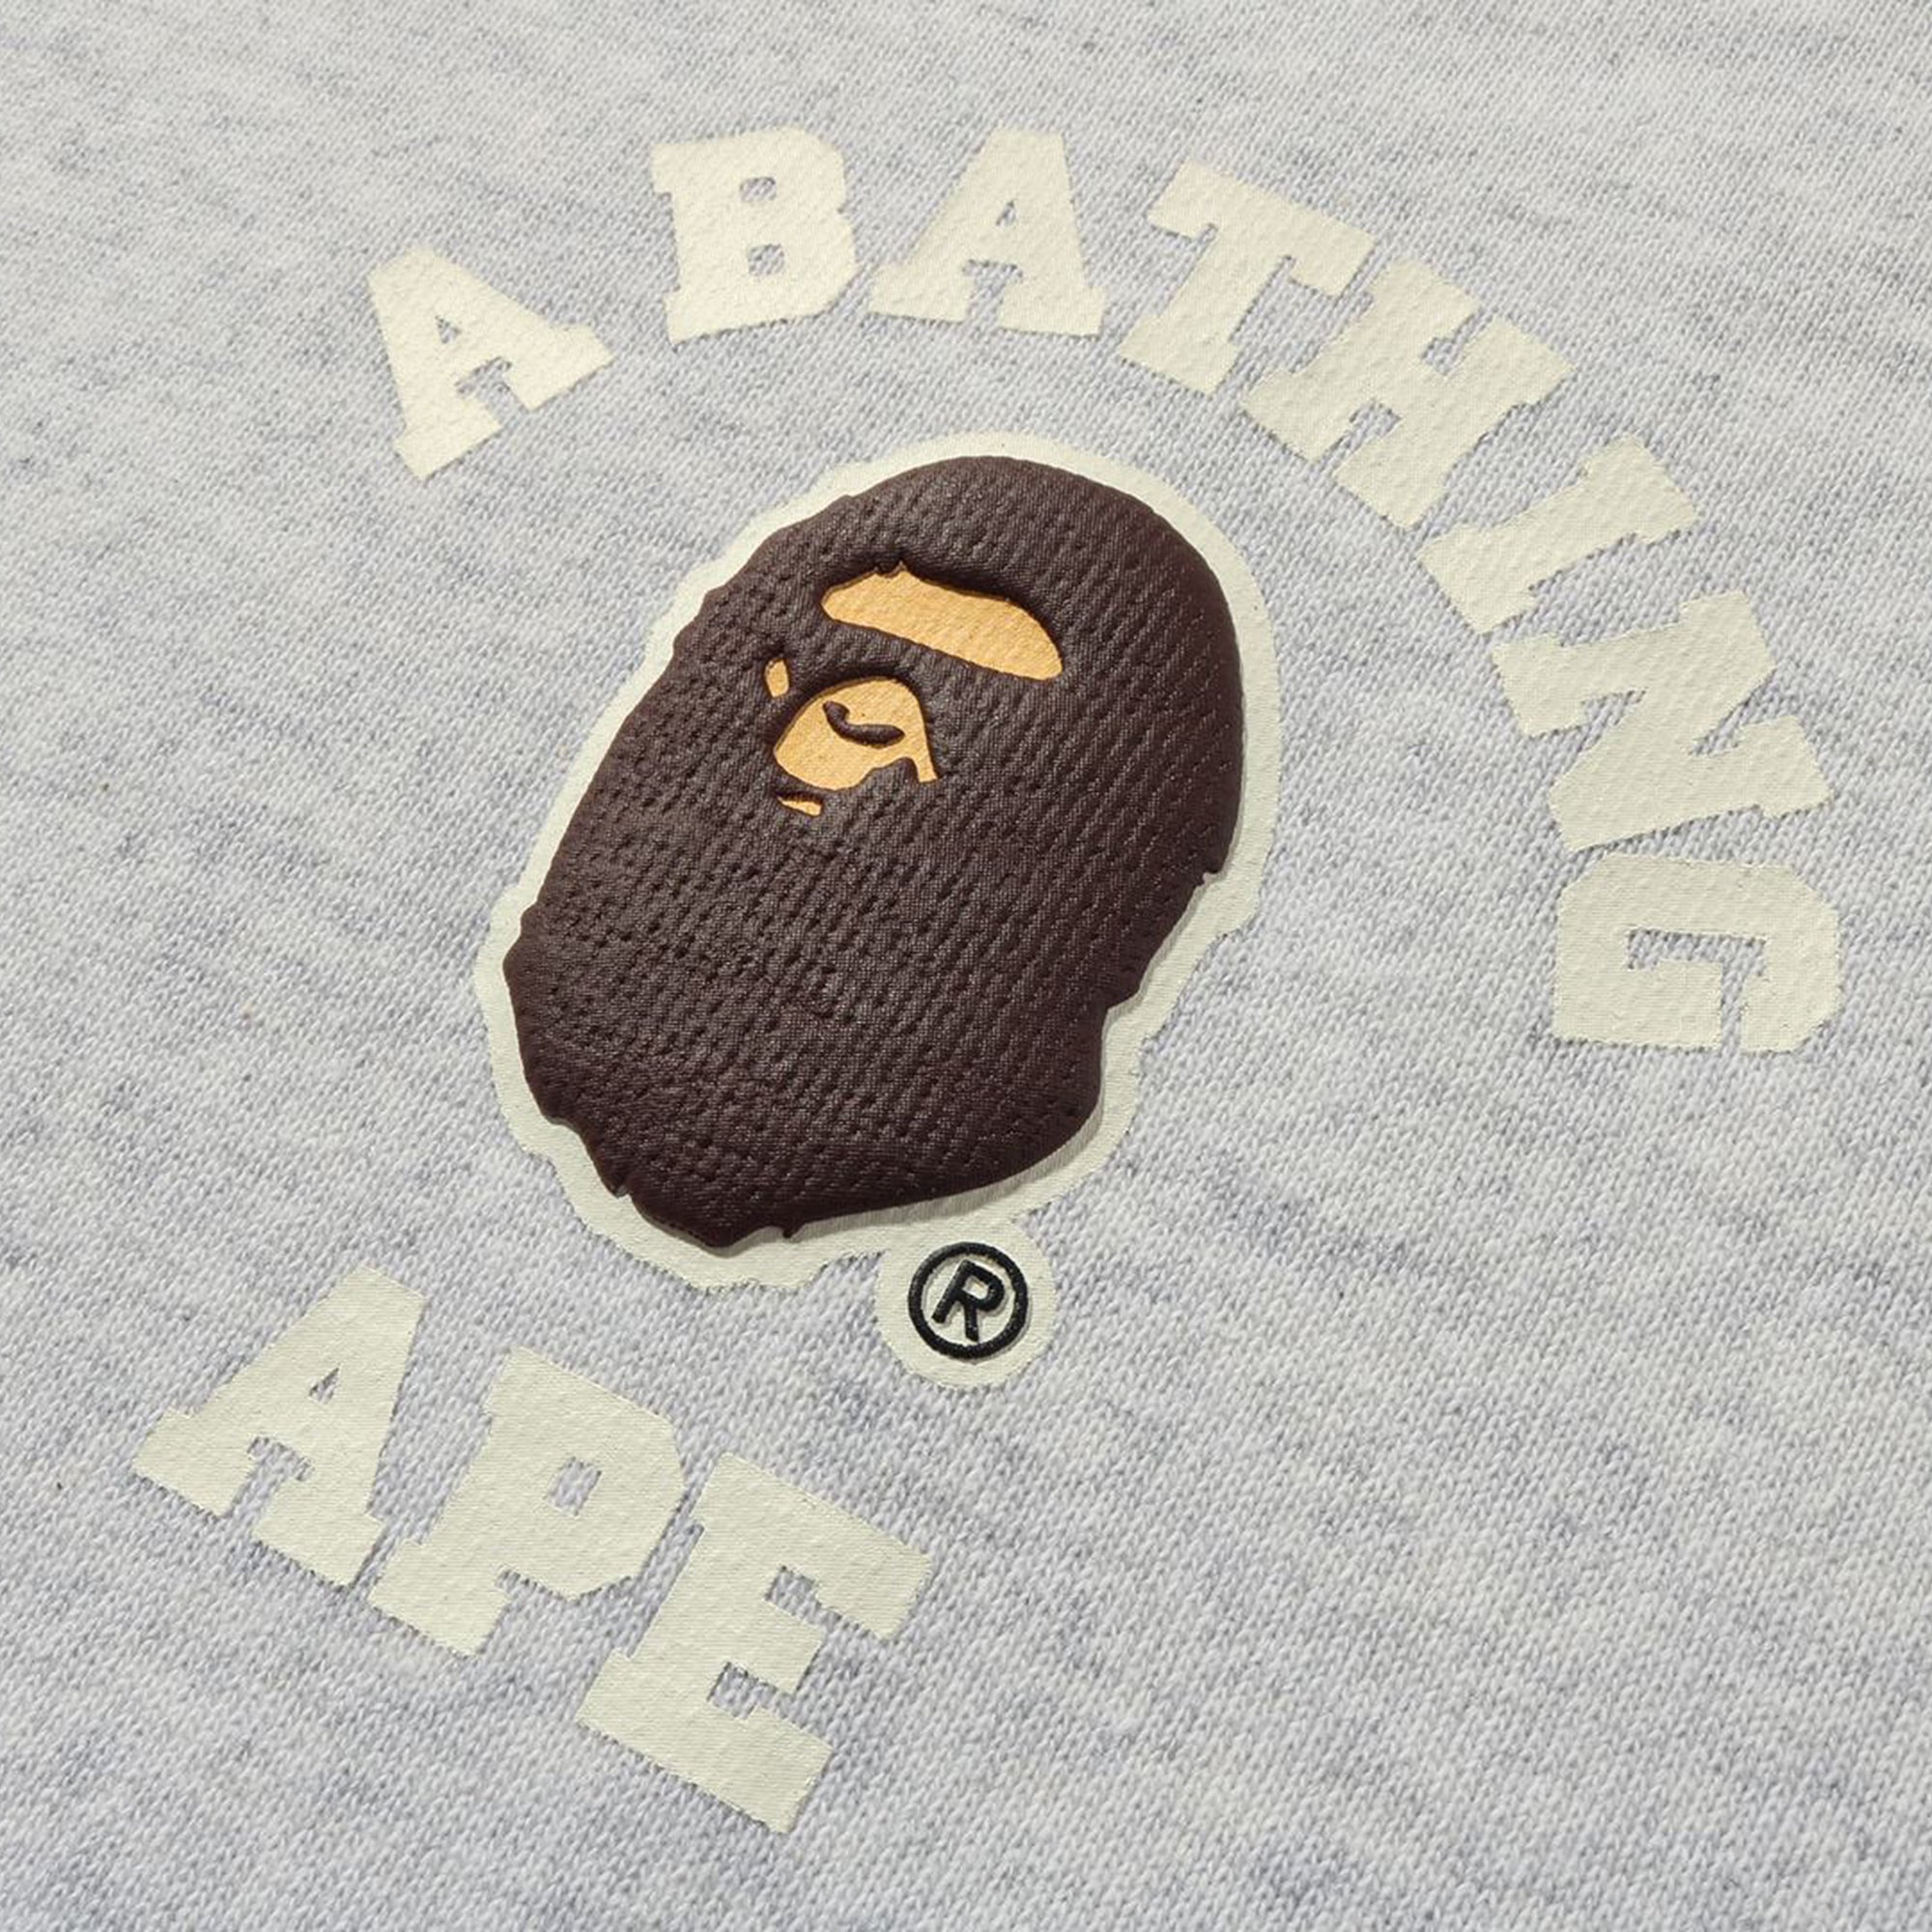 BY BATHING APE RELAXED PULLOVER HOODIE –